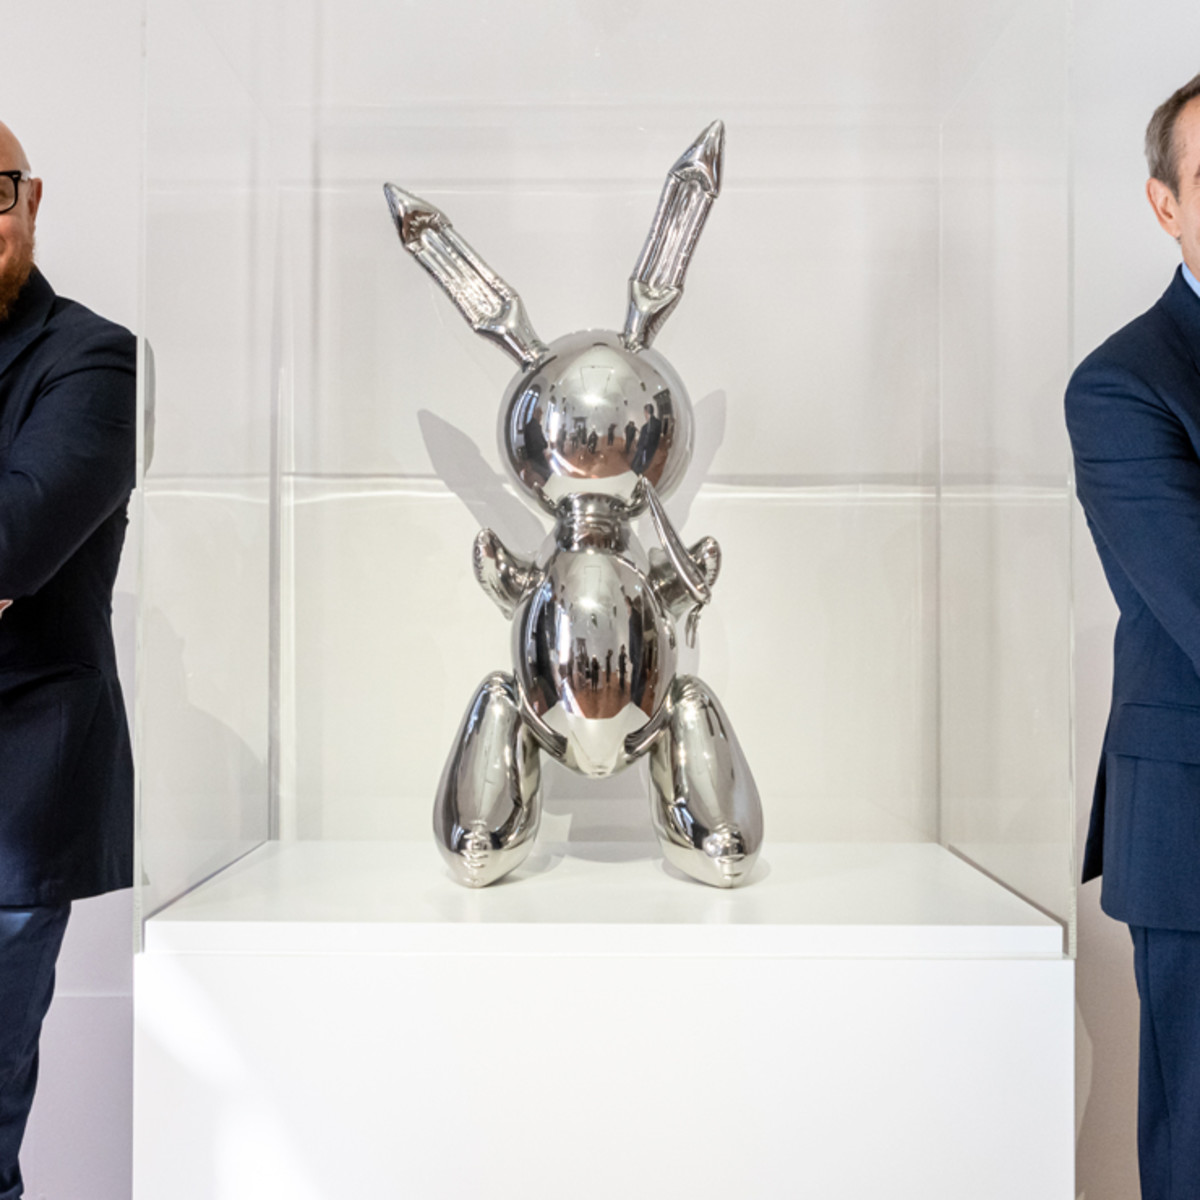 Jeff Koons, the world's most coveted living artist - HIGHXTAR.